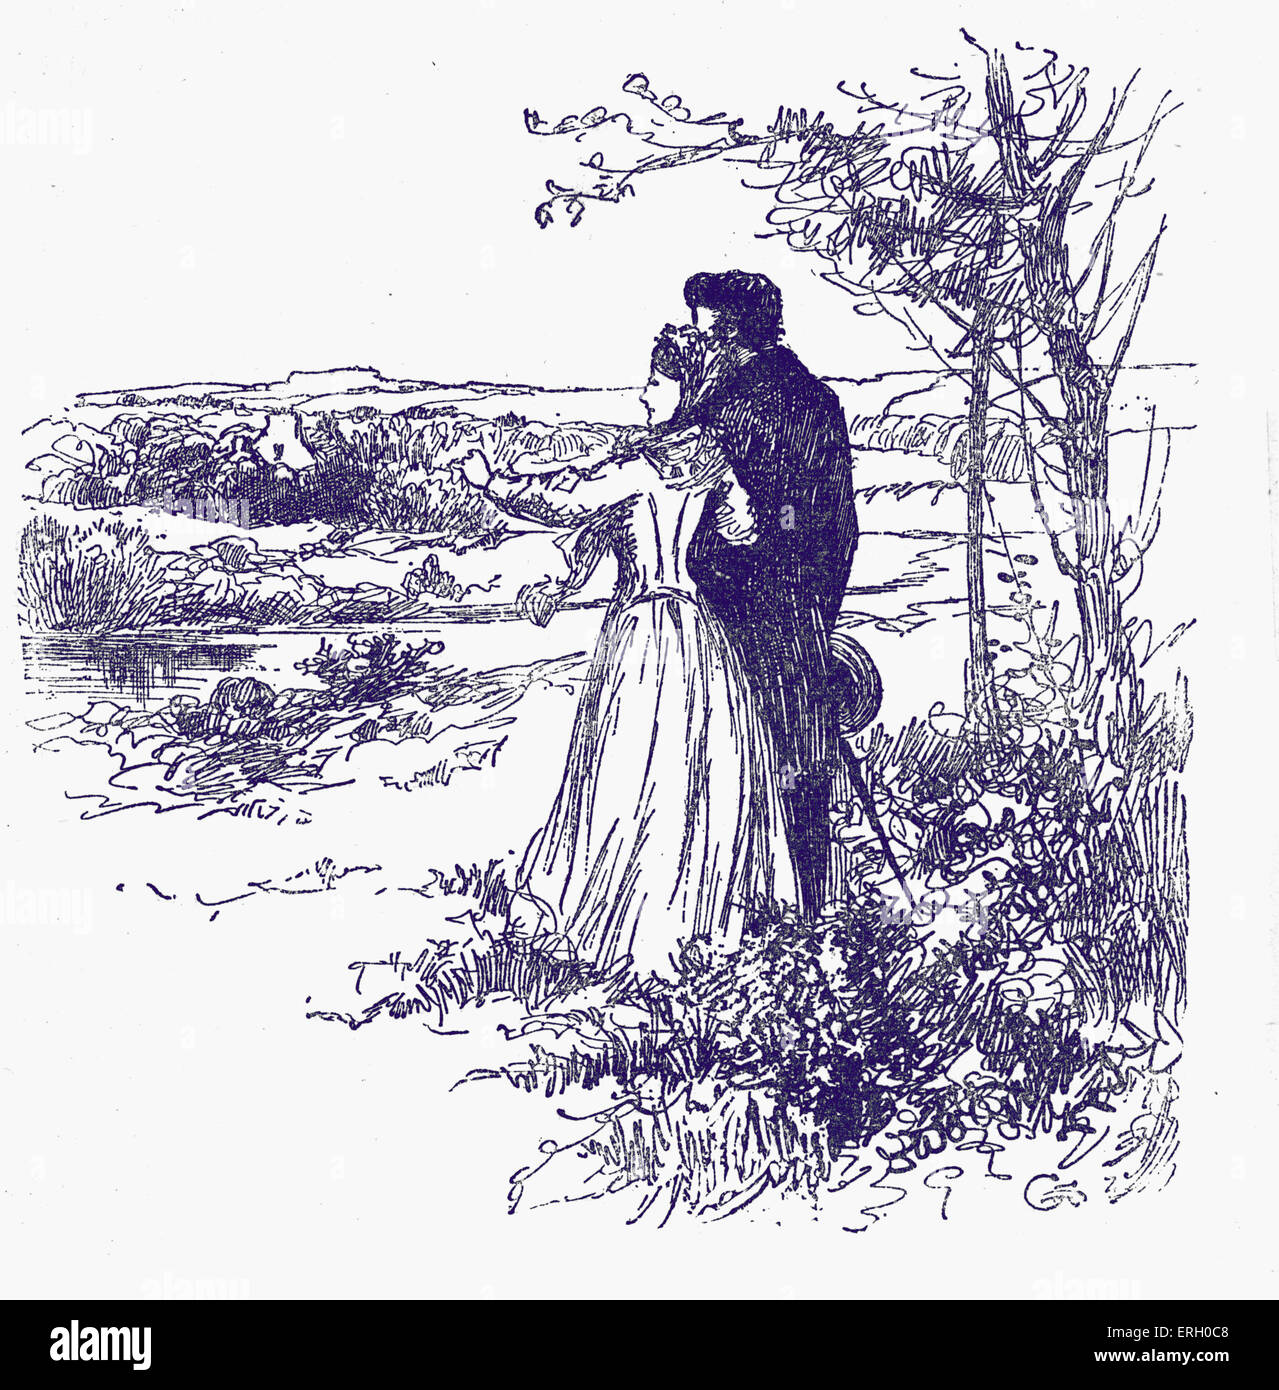 Jane Eyre by Charlotte Brontë. Caption reads: 'He saw Nature, he saw books, through me.' (couple peering at the view). Charlotte Brontë, British novelist, 1816-1855. Illustrated by Edmund Henry Garrett. Stock Photo